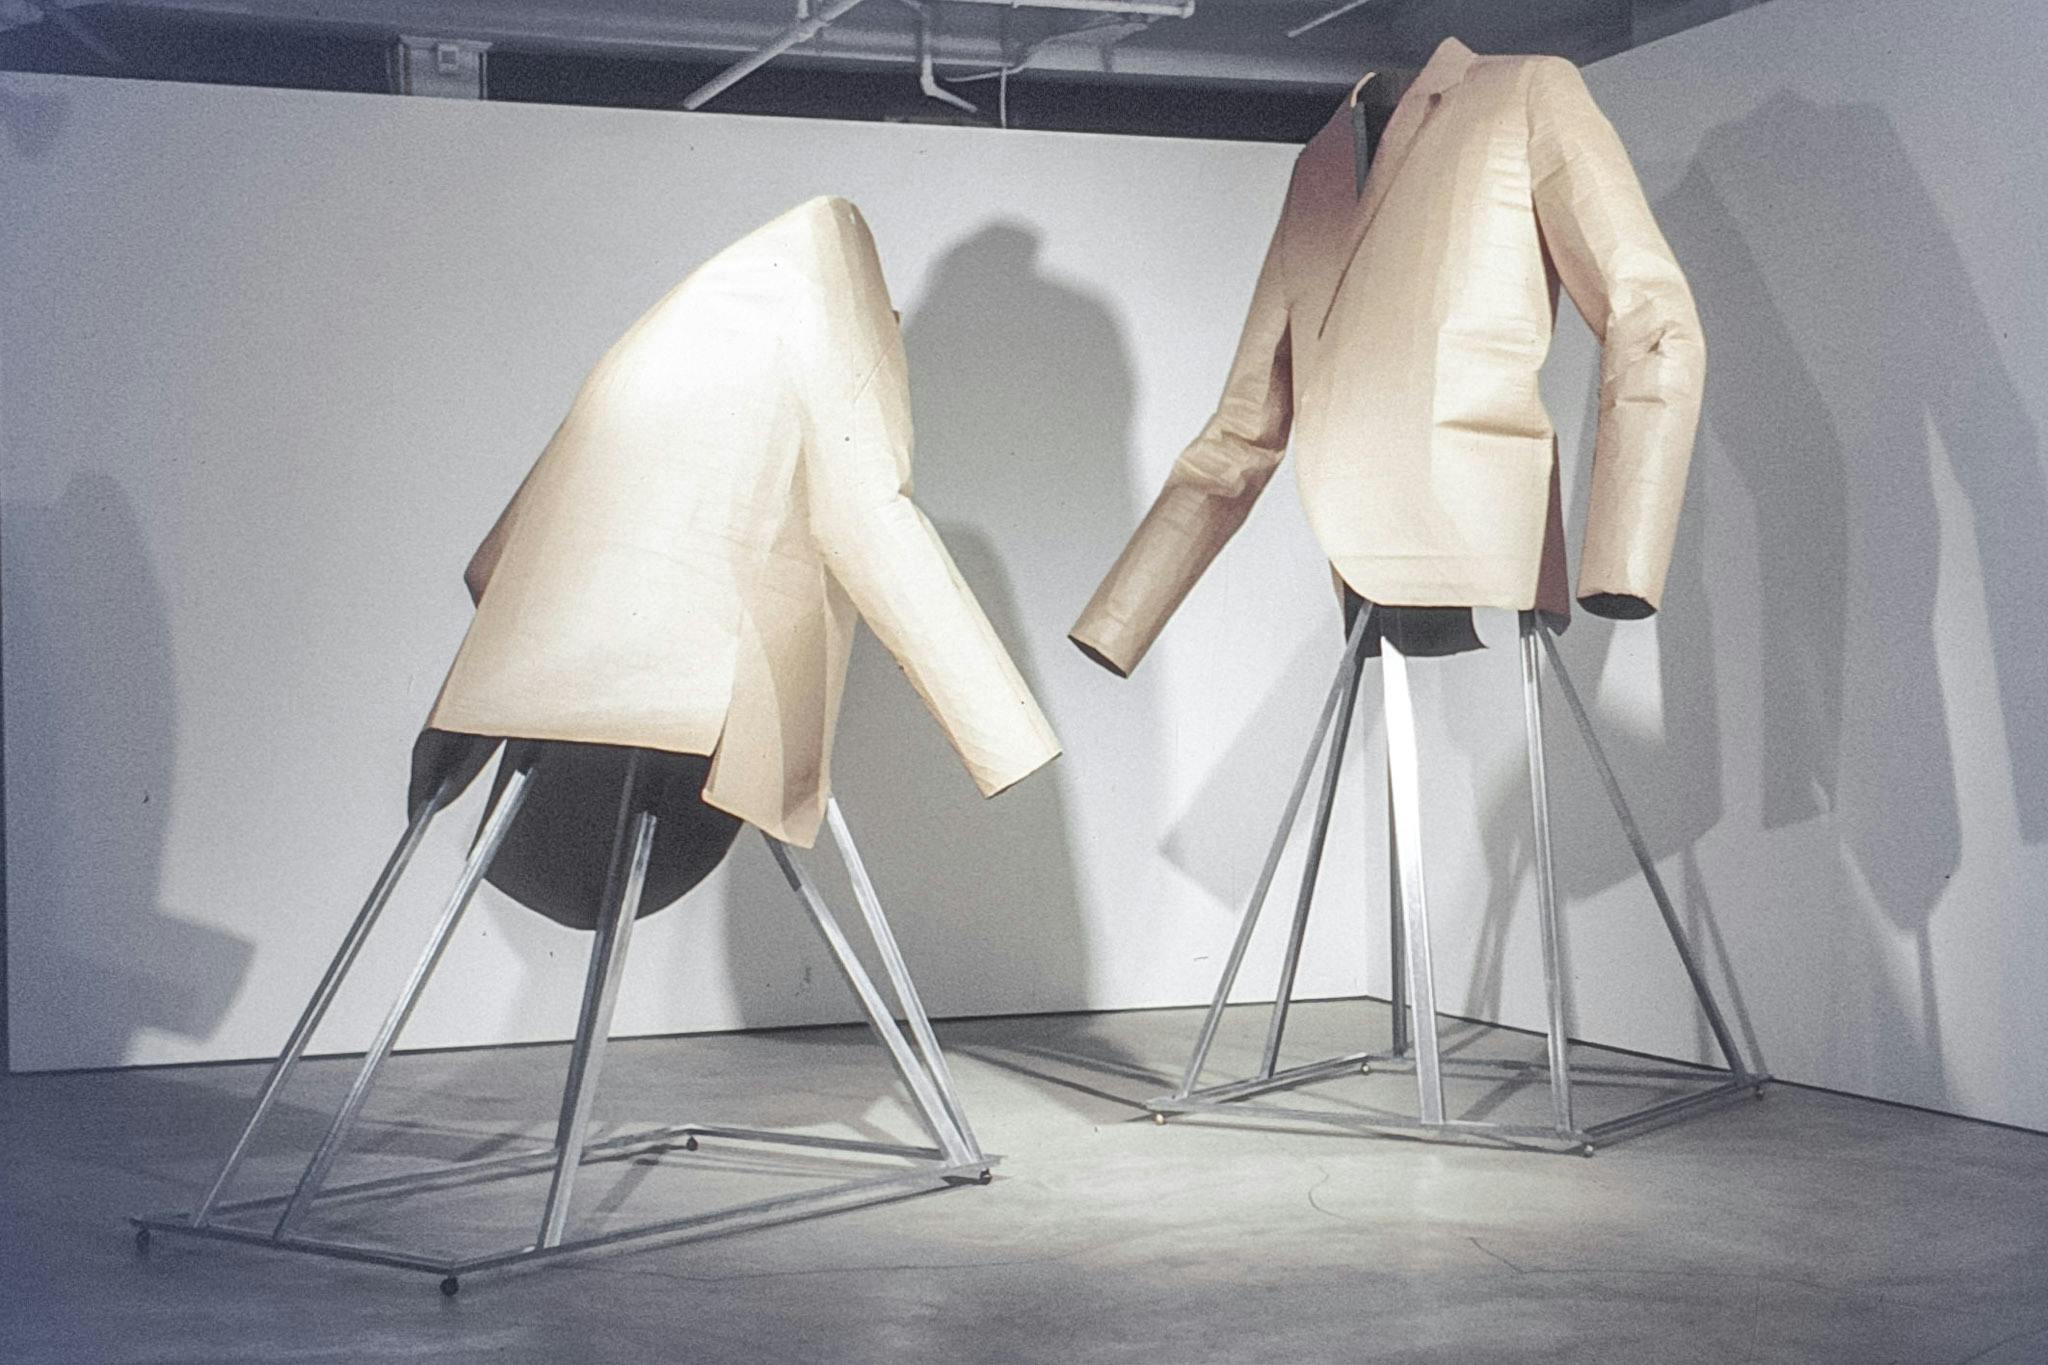 Two large sculptures in a gallery. The works are made of metal pyramidal frame bases, with huge blazers made of cardboard at the top. The blazers face each other and one is leaning forward slightly. 